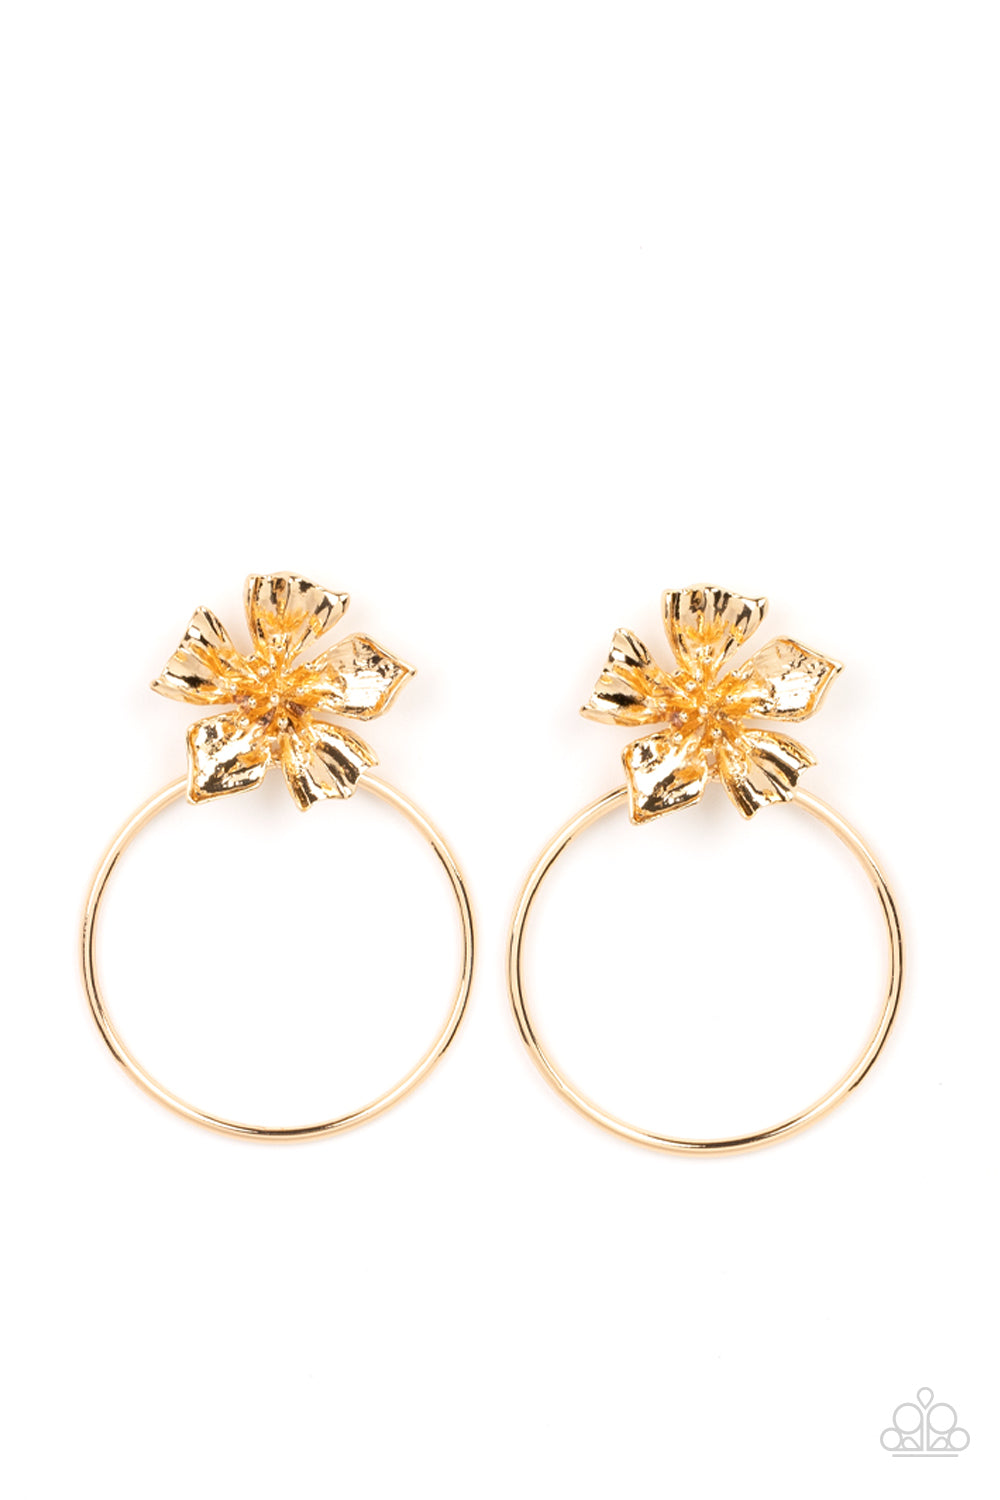 Paparazzi Accessories - Buttercup Bliss - Gold Earrings featuring lifelike textures, a shimmery gold buttercup blooms atop an oversized gold hoop for a whimsical allure. Earring attaches to a standard post fitting.  Sold as one pair of post earrings.